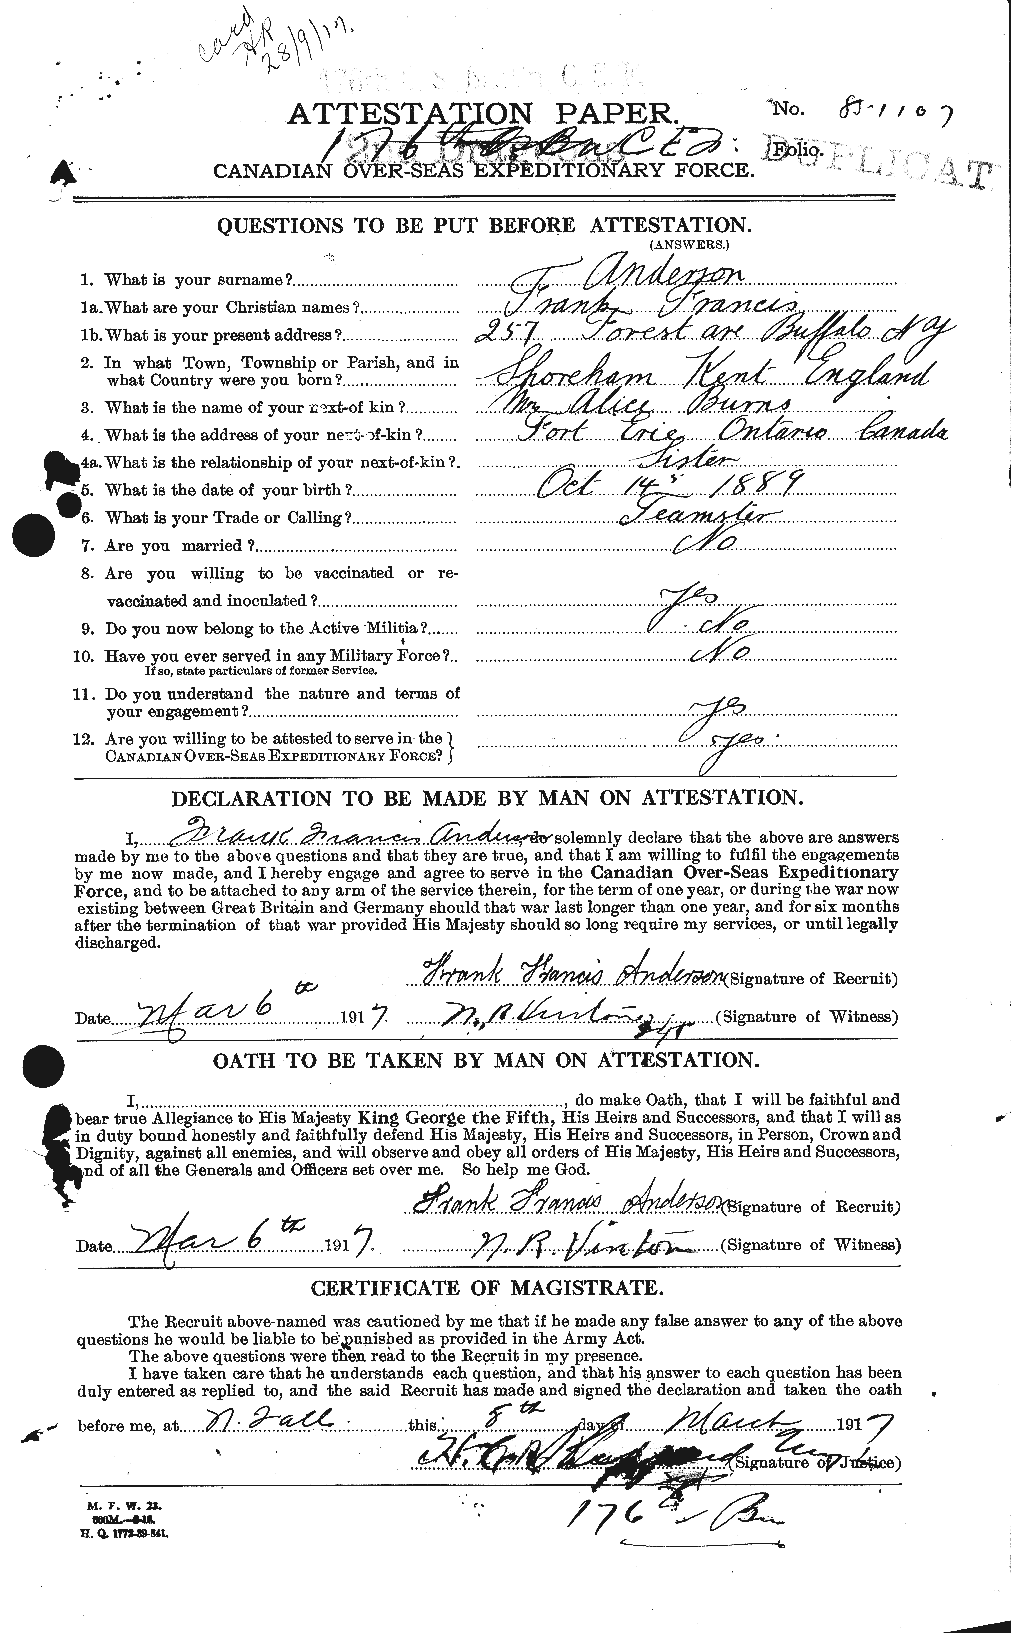 Personnel Records of the First World War - CEF 209849a